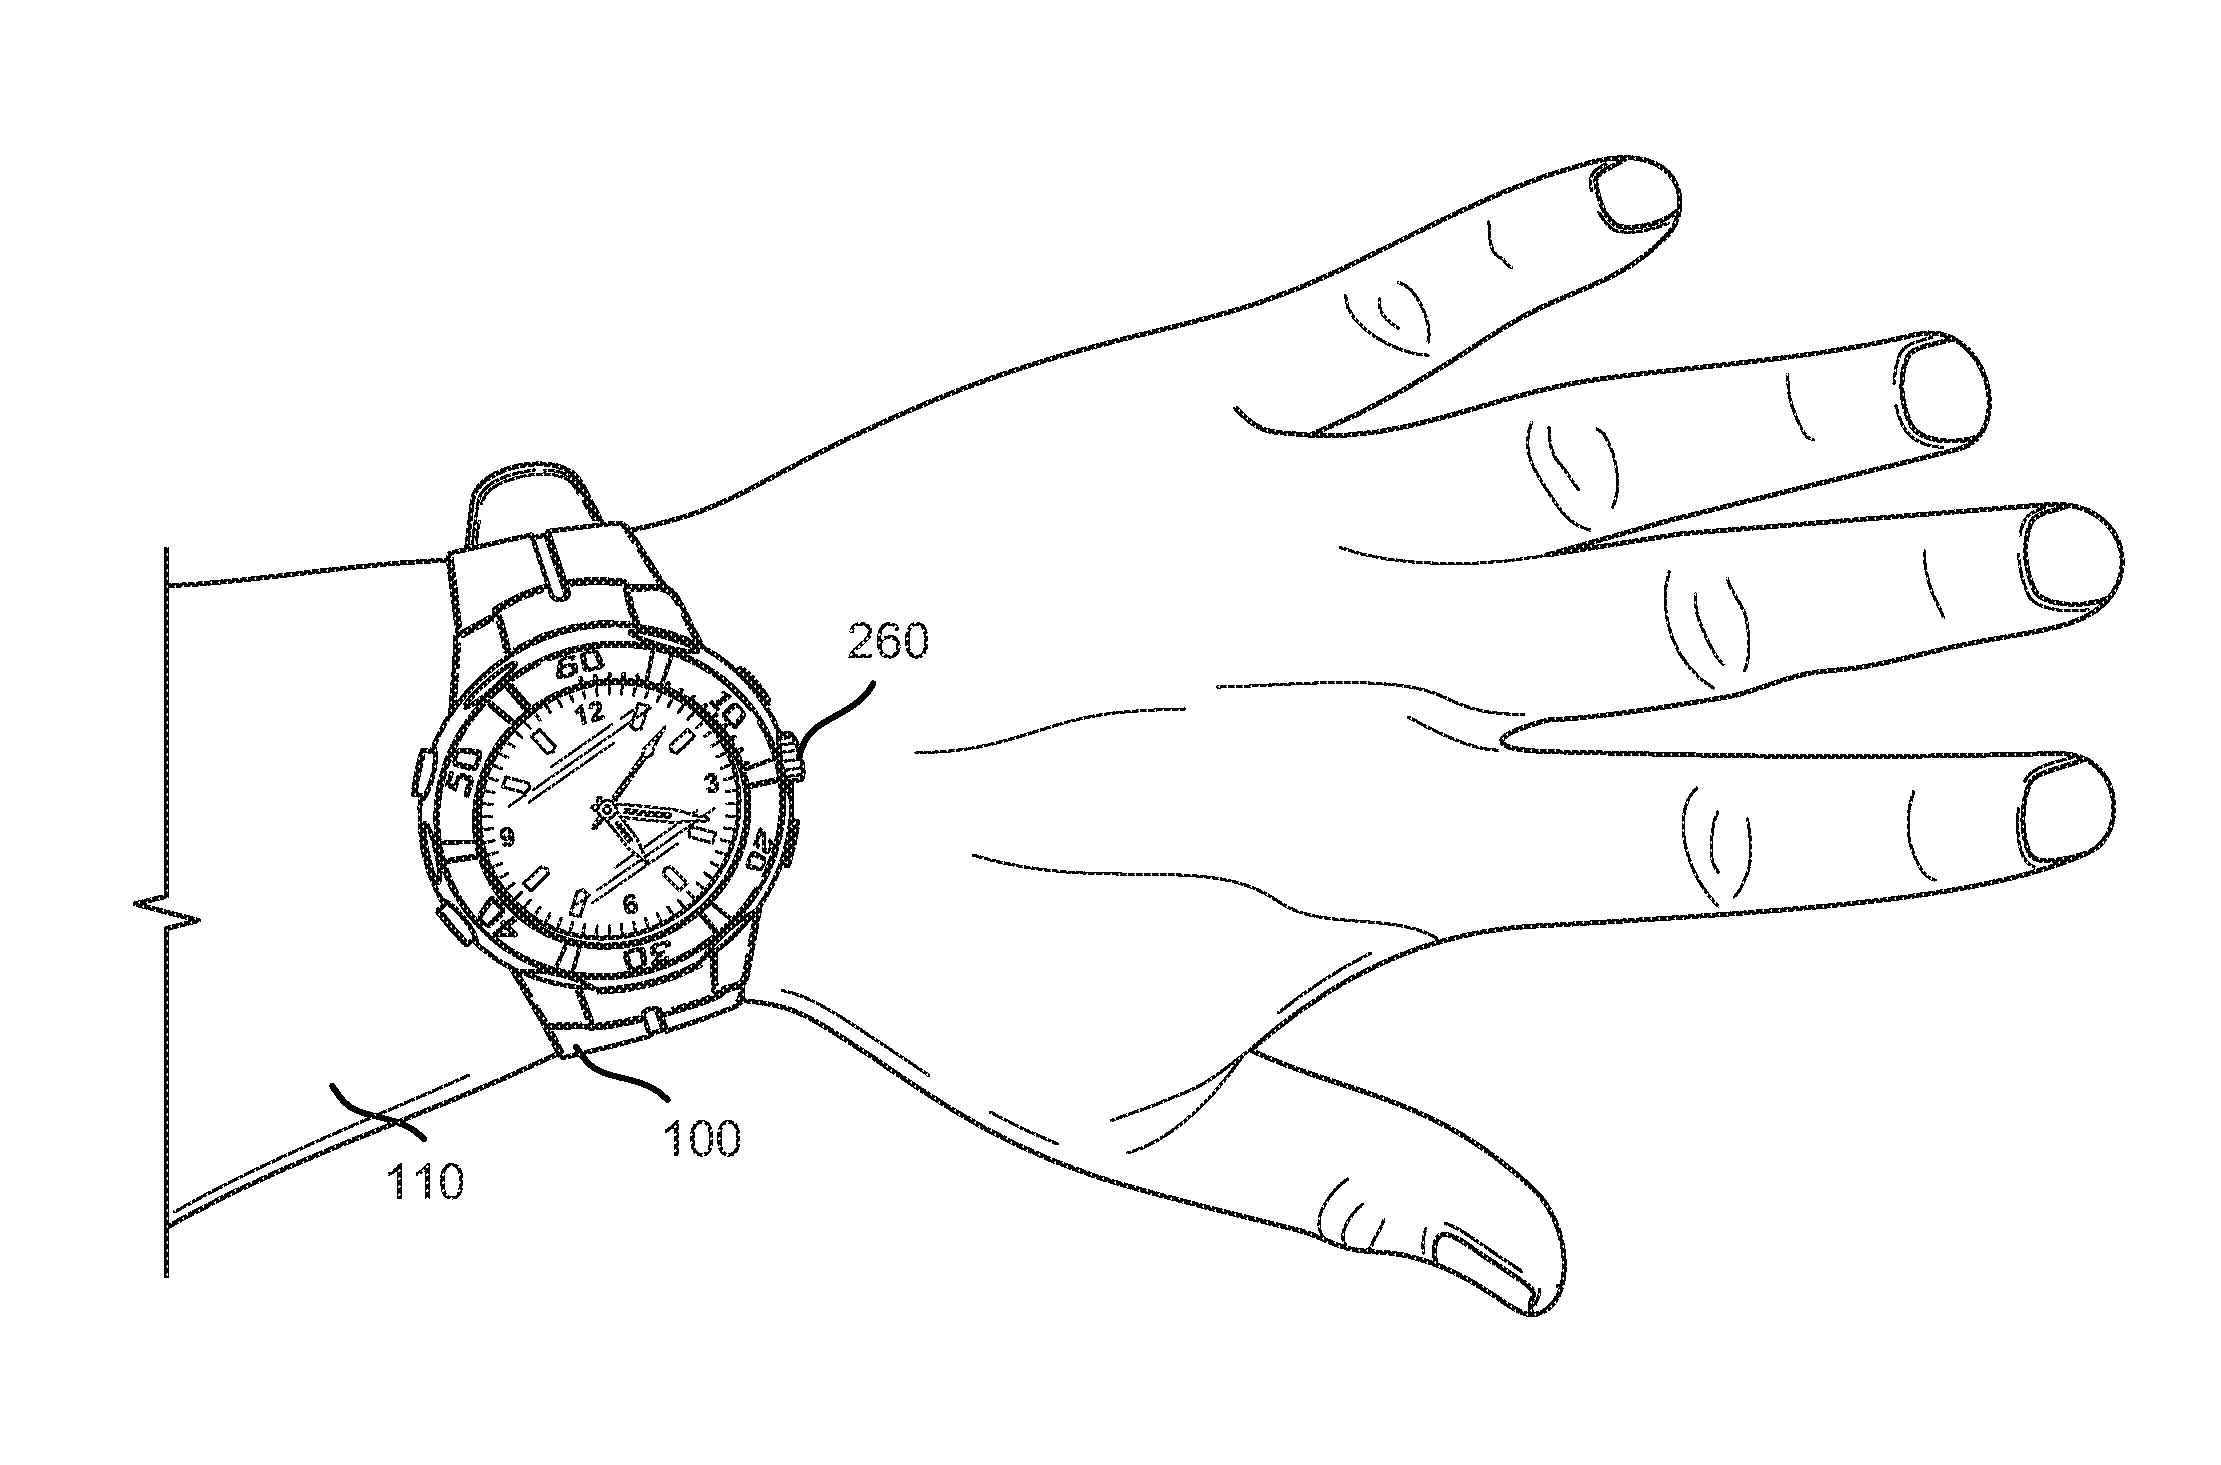 Electrostatic discharge protection for analog component of wrist-worn device